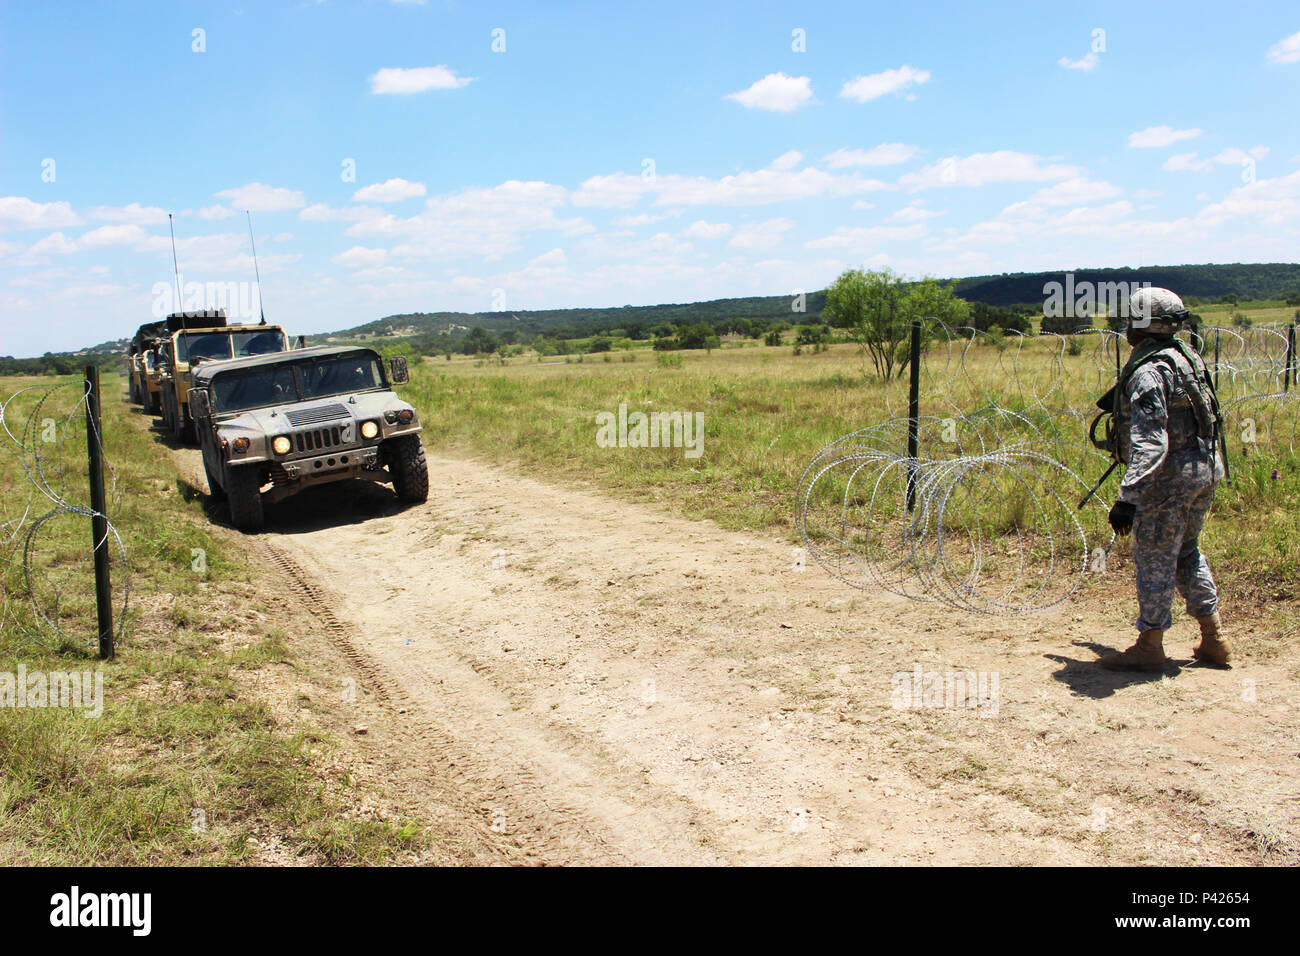 Soldiers of the 287th Engineer Company, 890th Engineer Battalion, set up an Entry Control Point at the Command Post of the Special Troops Battalion, 155th Armored Brigade Combat Team on June 7, 2016, at Fort Hood, Texas. The 287th En. Co. is an enabler unit for the 155th Armored Brigade Combat Team’s Multi-integrated Echelon Brigade Training Exercise. (Mississippi National Guard photos by Sgt. Brittany Johnson 155th Armored Brigade Combat Team Public Affairs/Released) Stock Photo